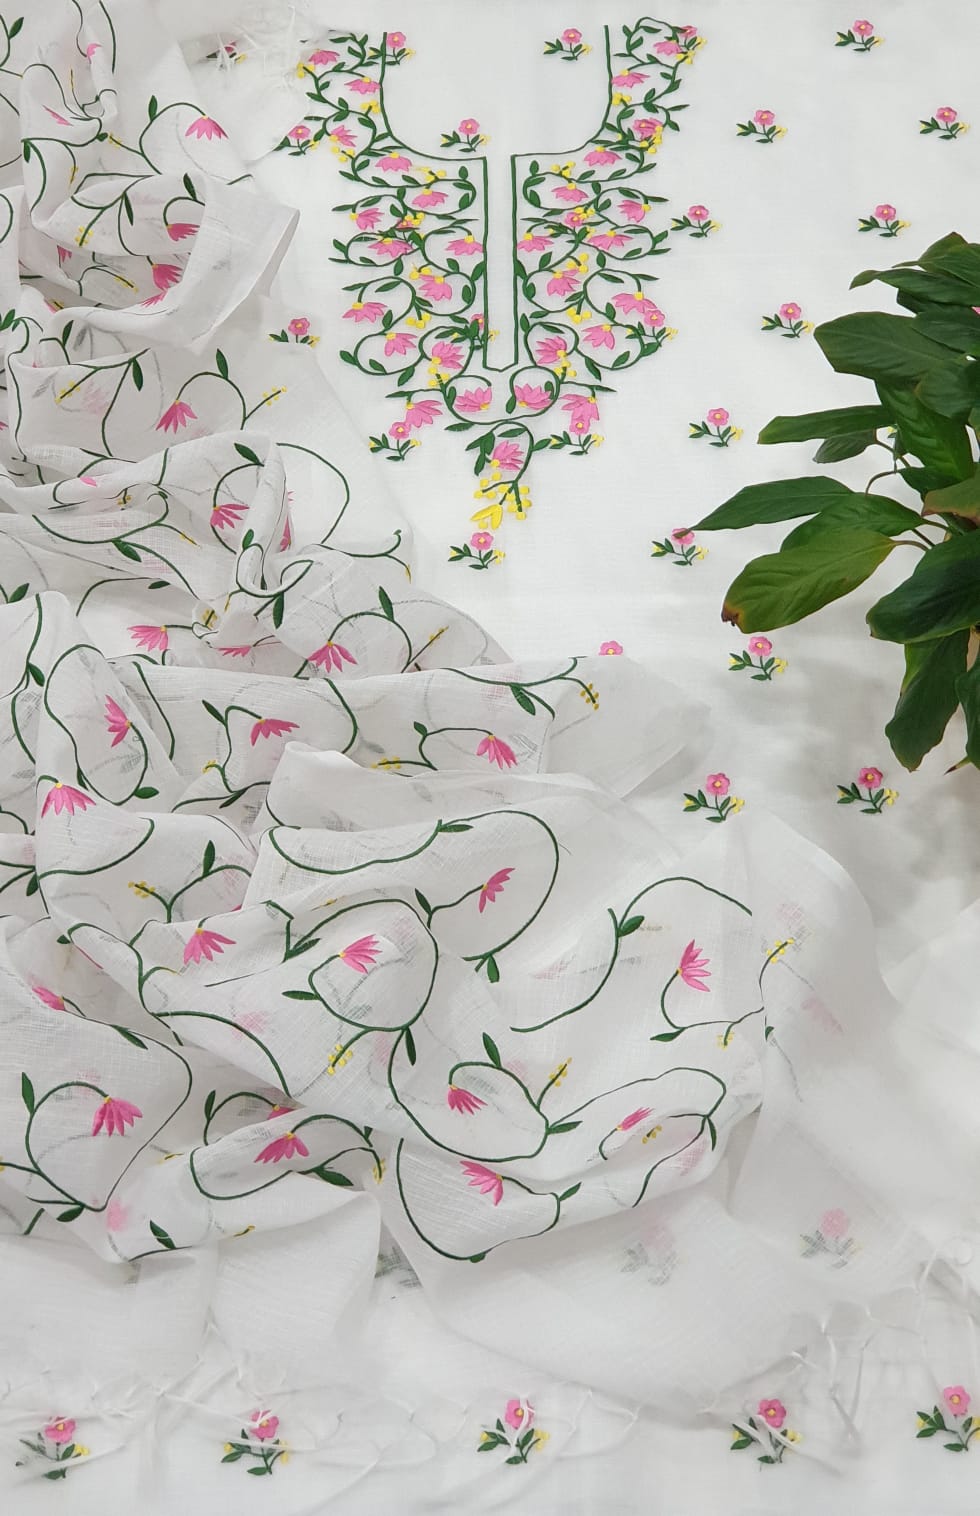 Kota Doriya Embroidery Work Suit In White and green